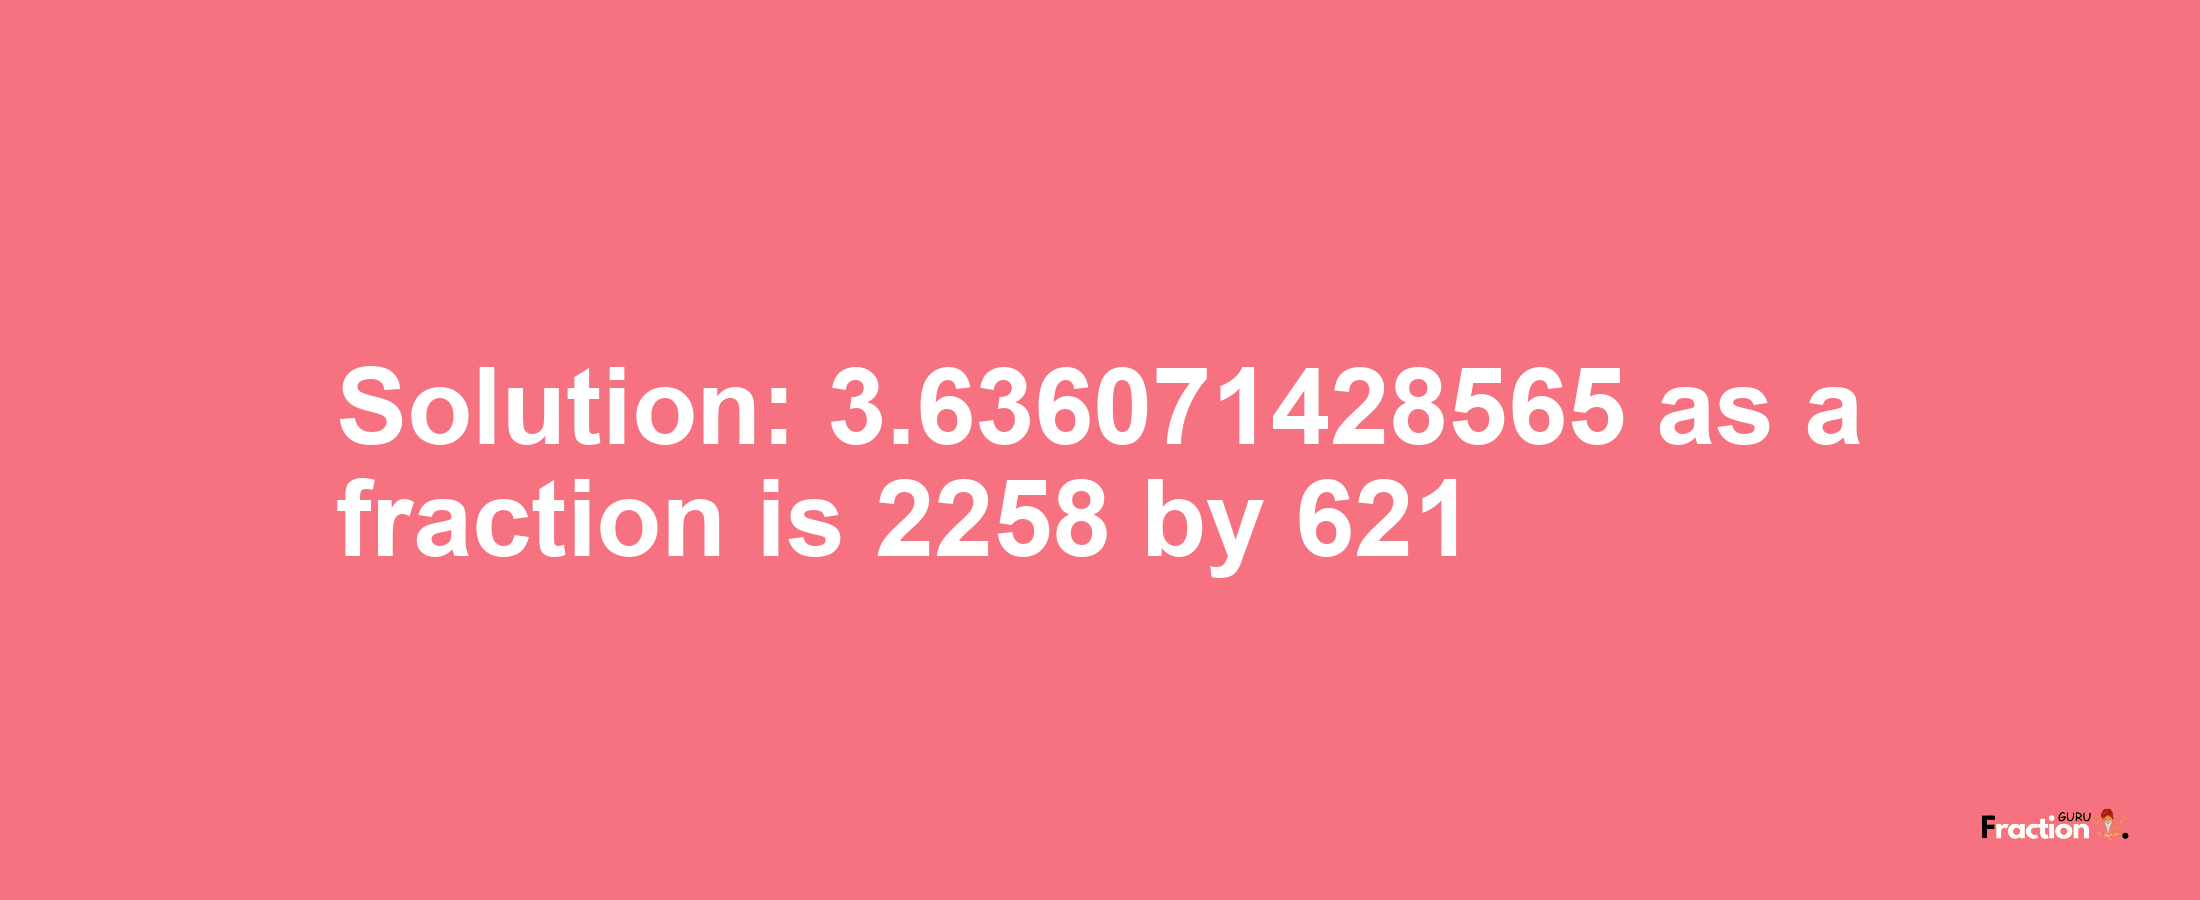 Solution:3.636071428565 as a fraction is 2258/621